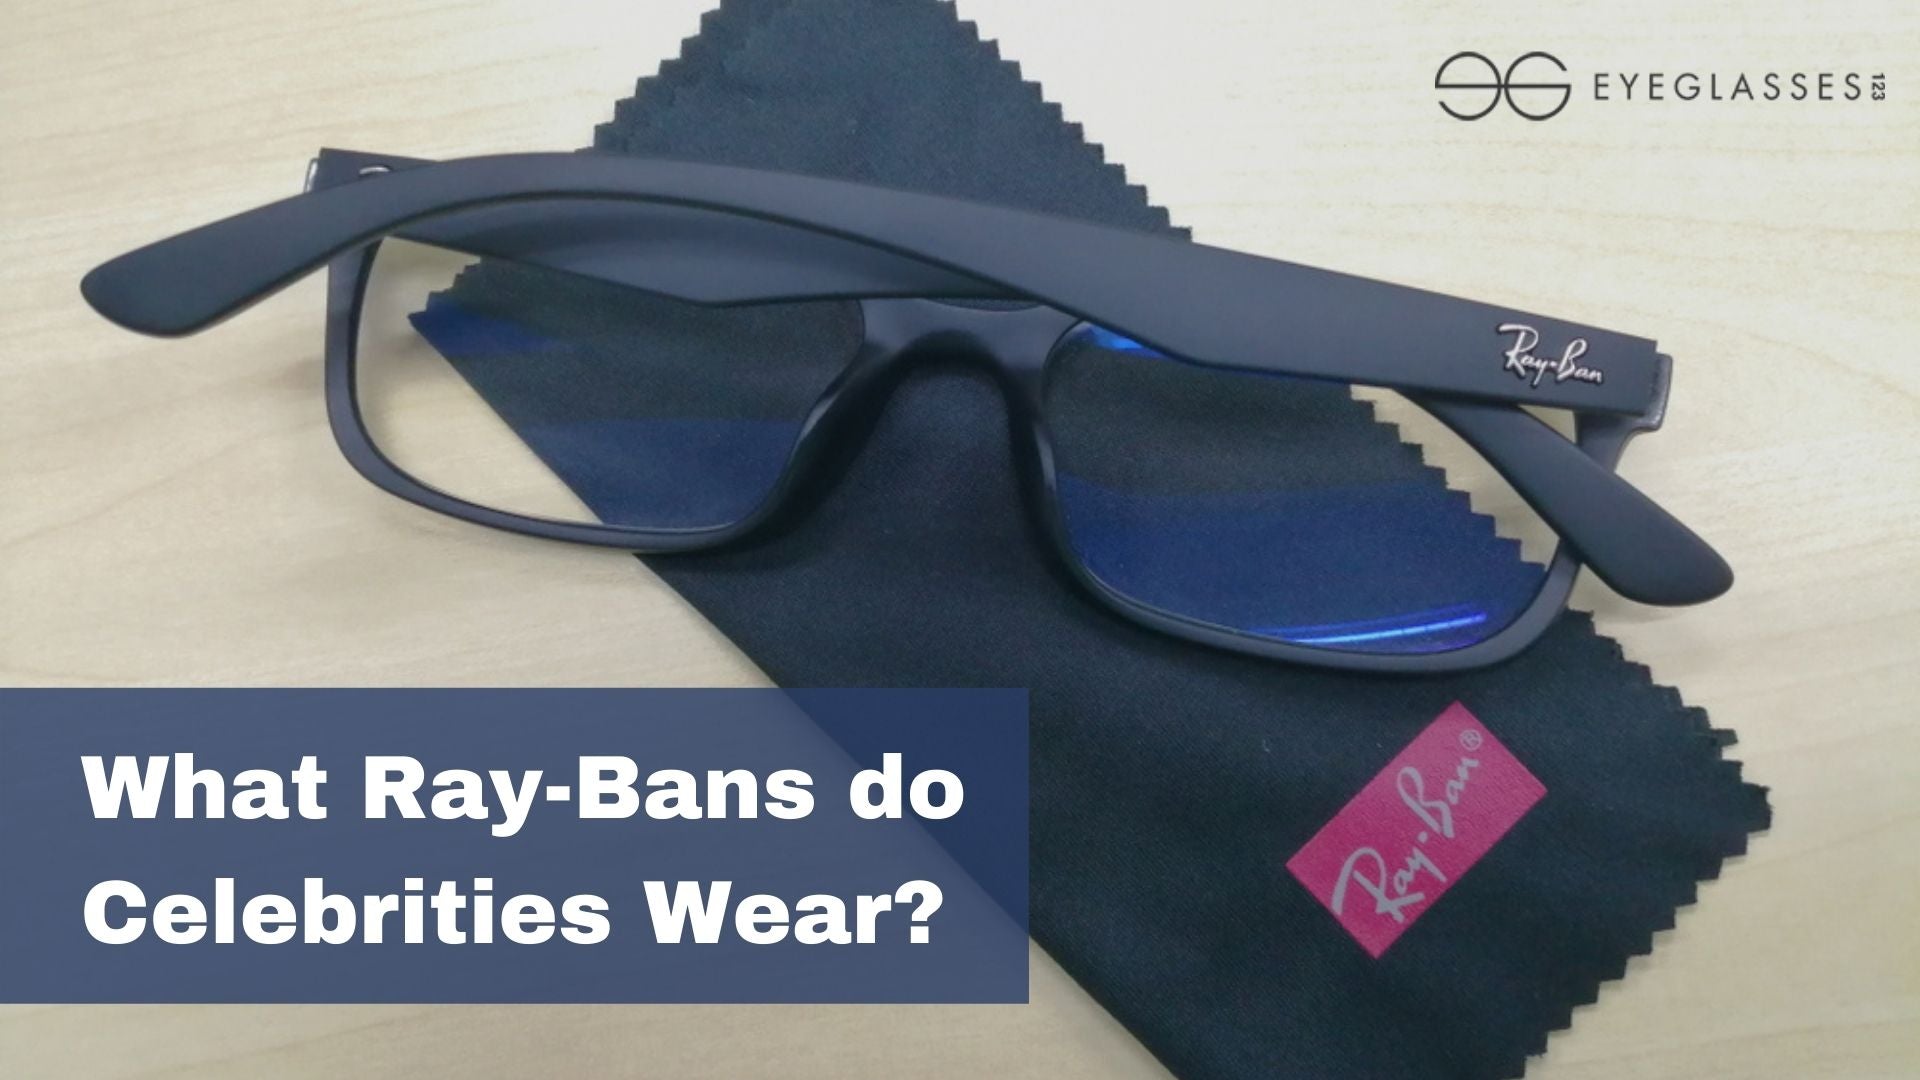 What Ray-Bans do Celebrities Wear?